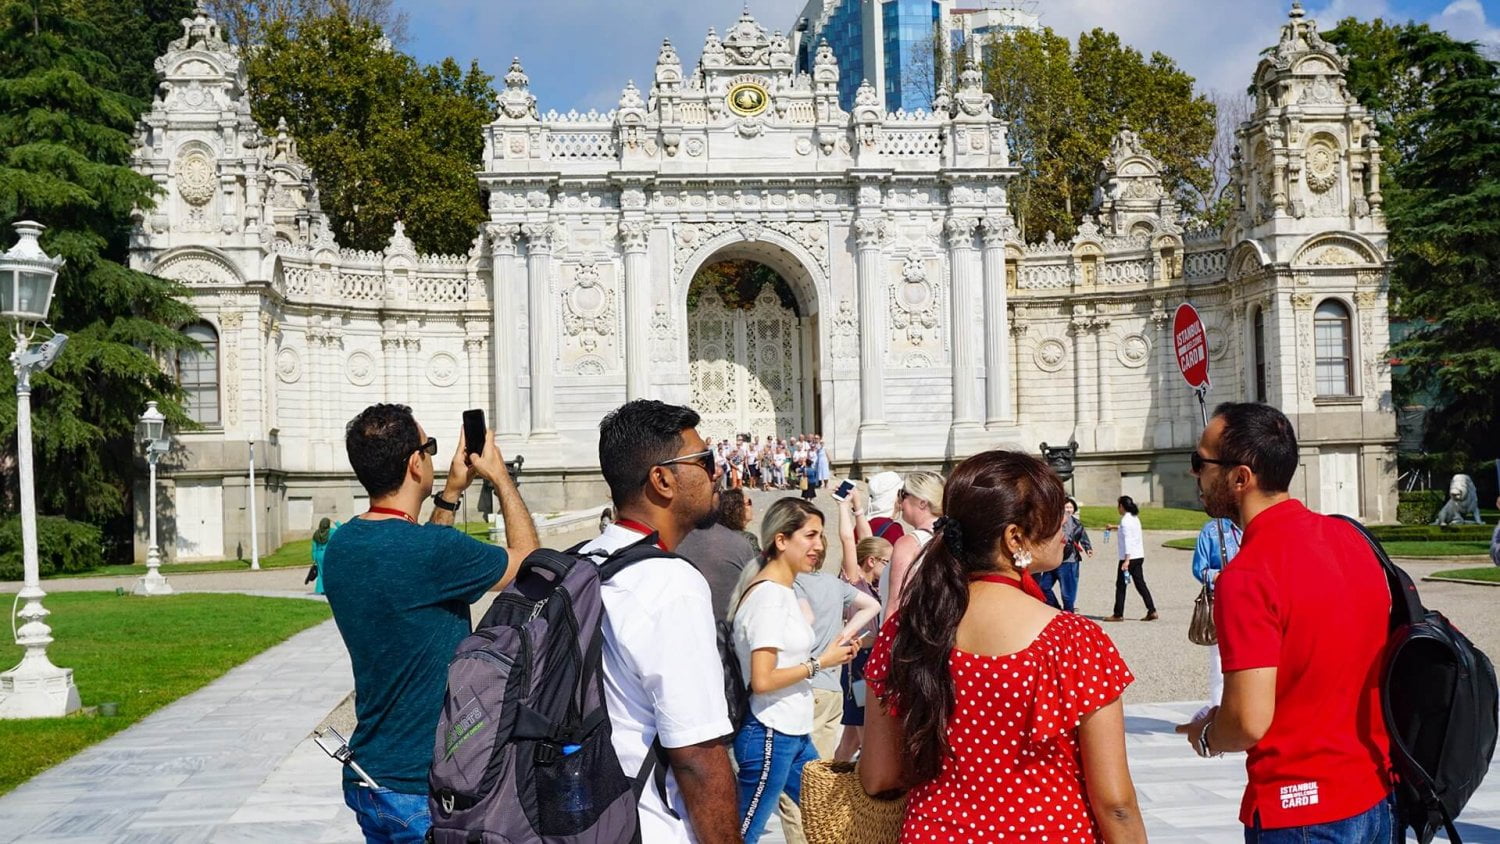 Dolmabahce Palace Museum (2022 Tickets, Skip the Lines, Insider Guide)